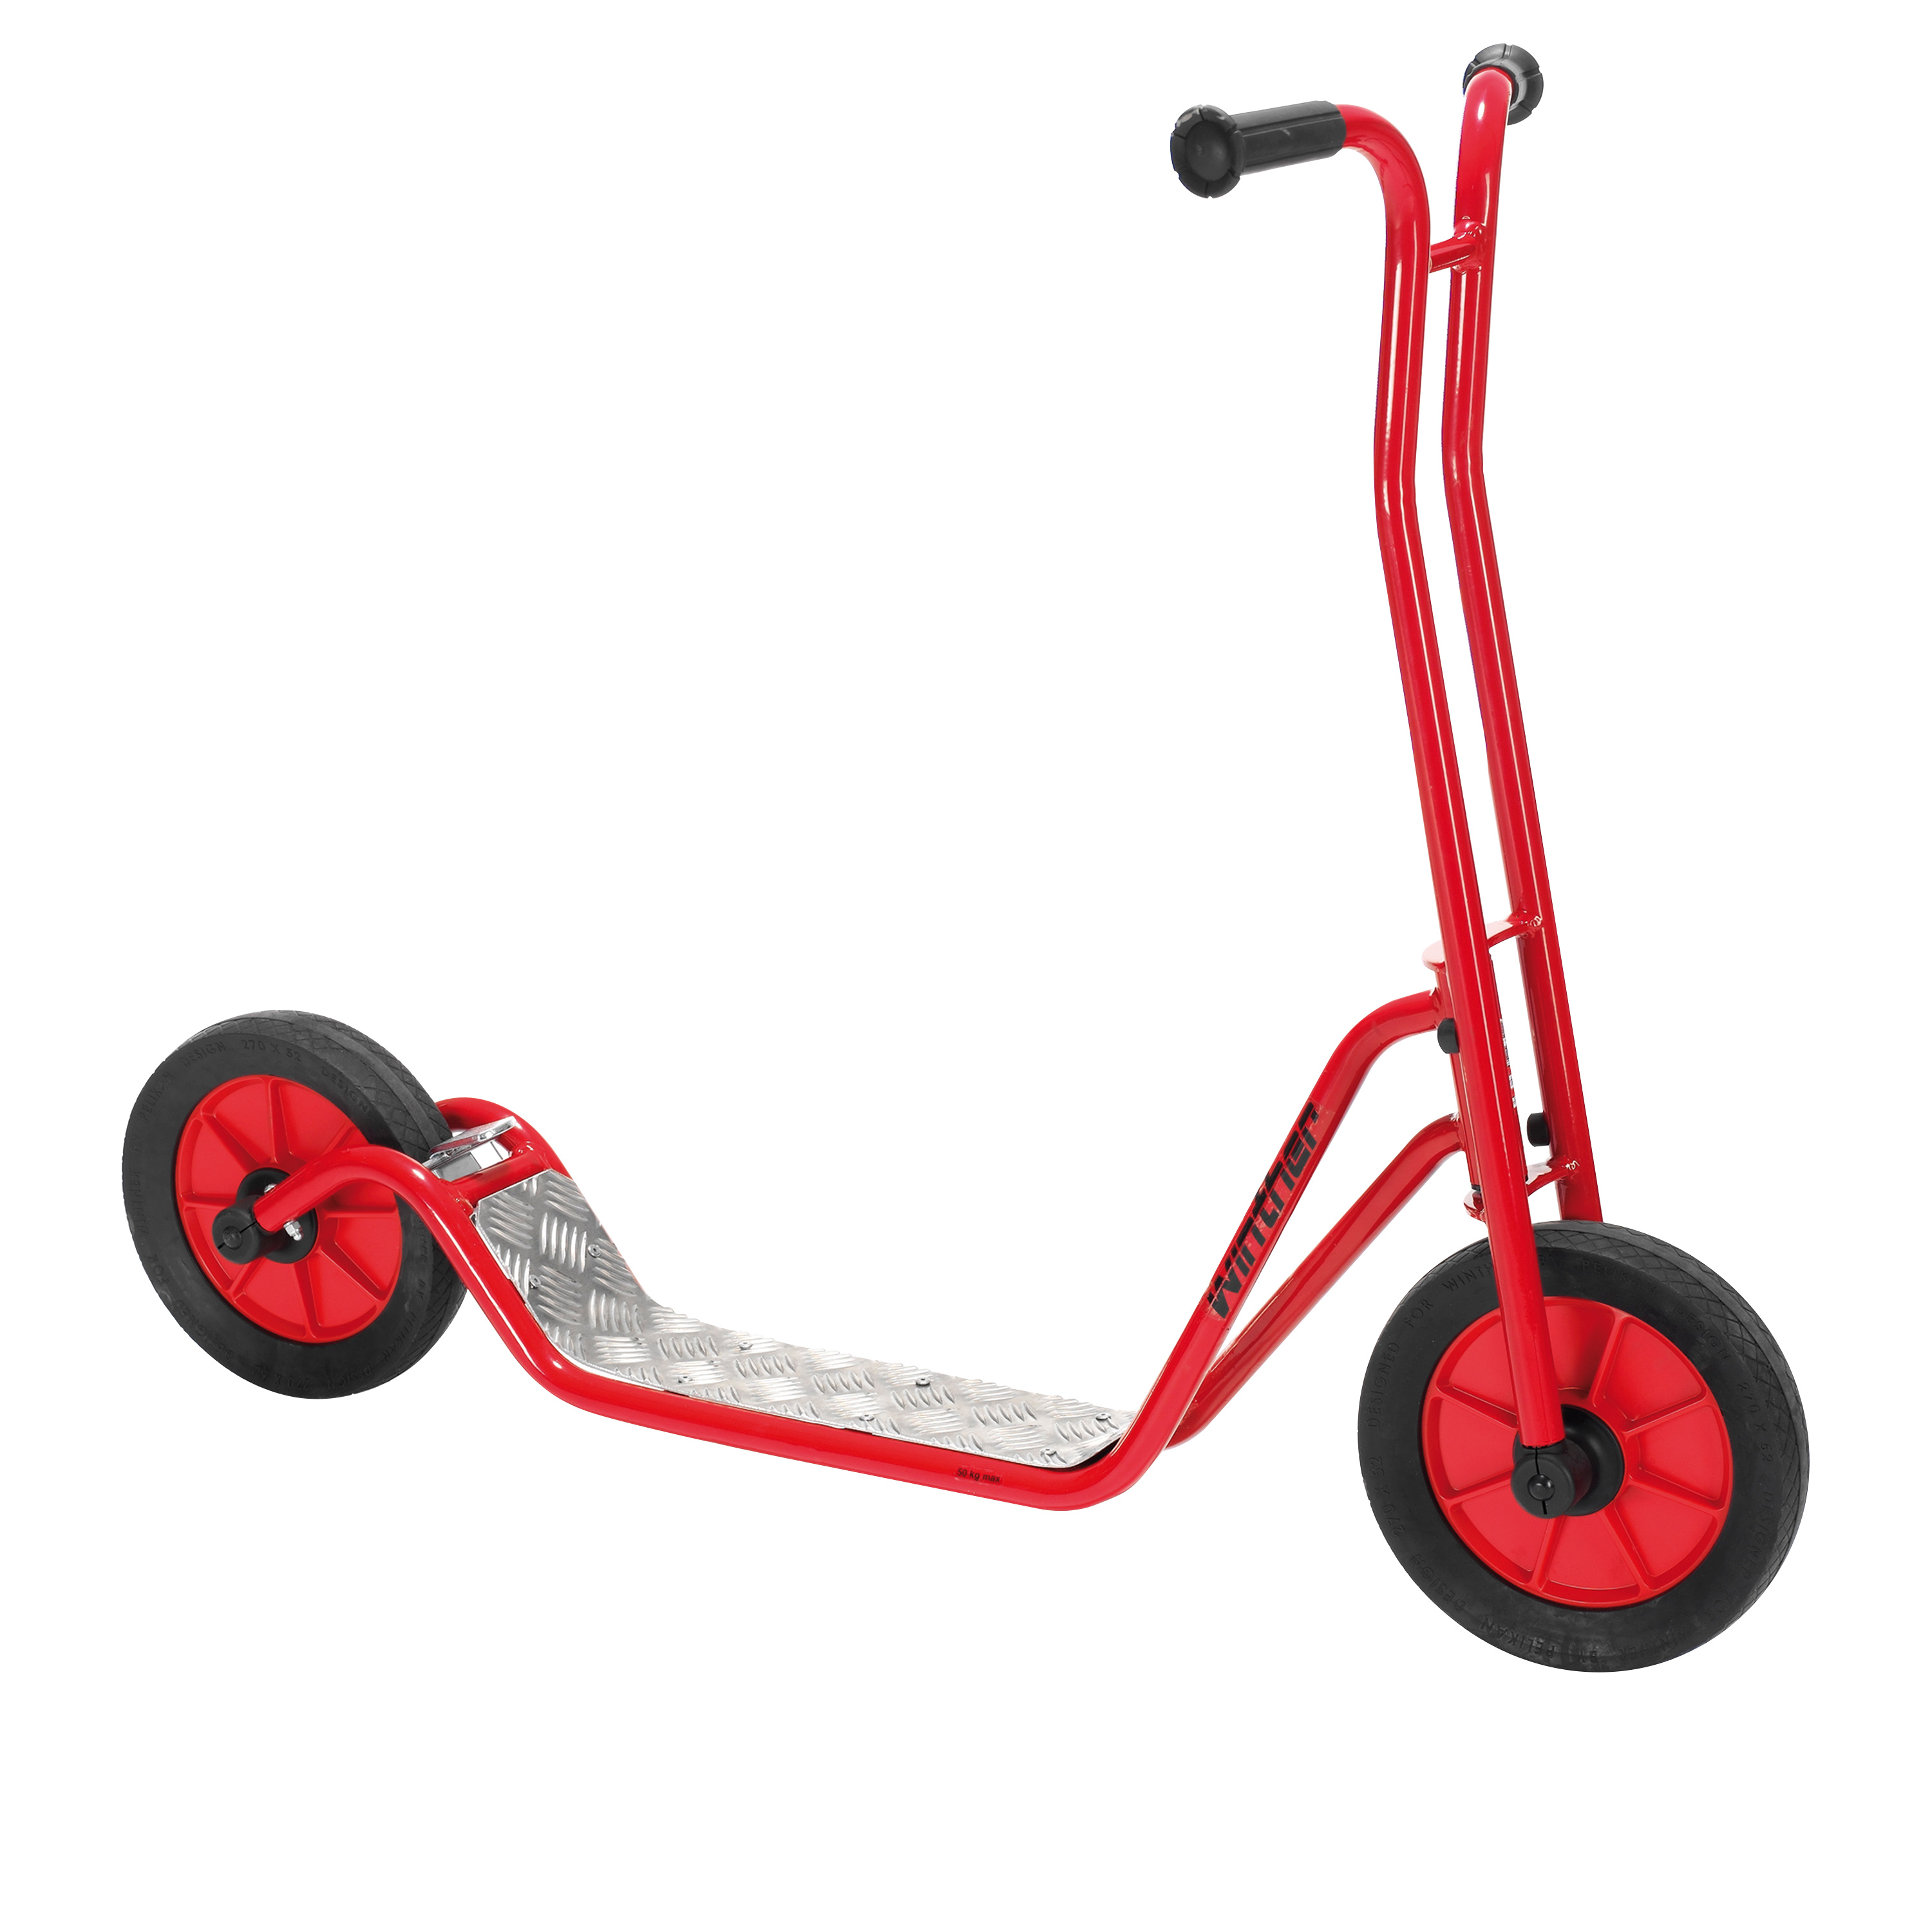 Winther 'Viking Roller maxi 495', 8 - 12 Jahre